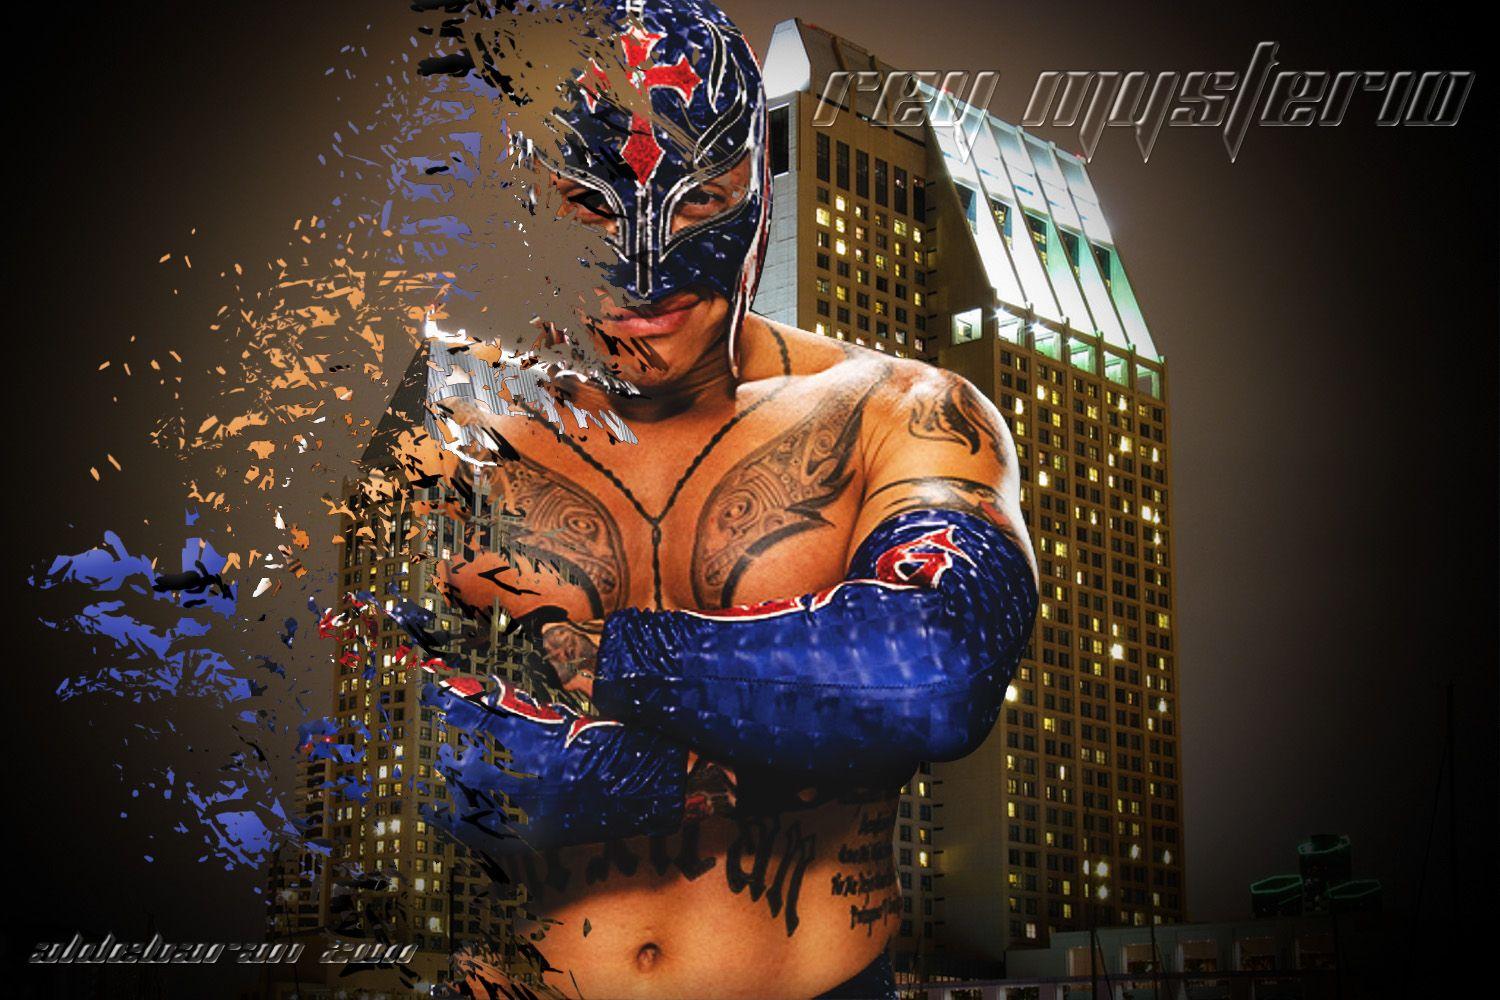 ALL SPORTS PLAYERS: Wwe Rey Mysterio 619 New HD Wallpaper